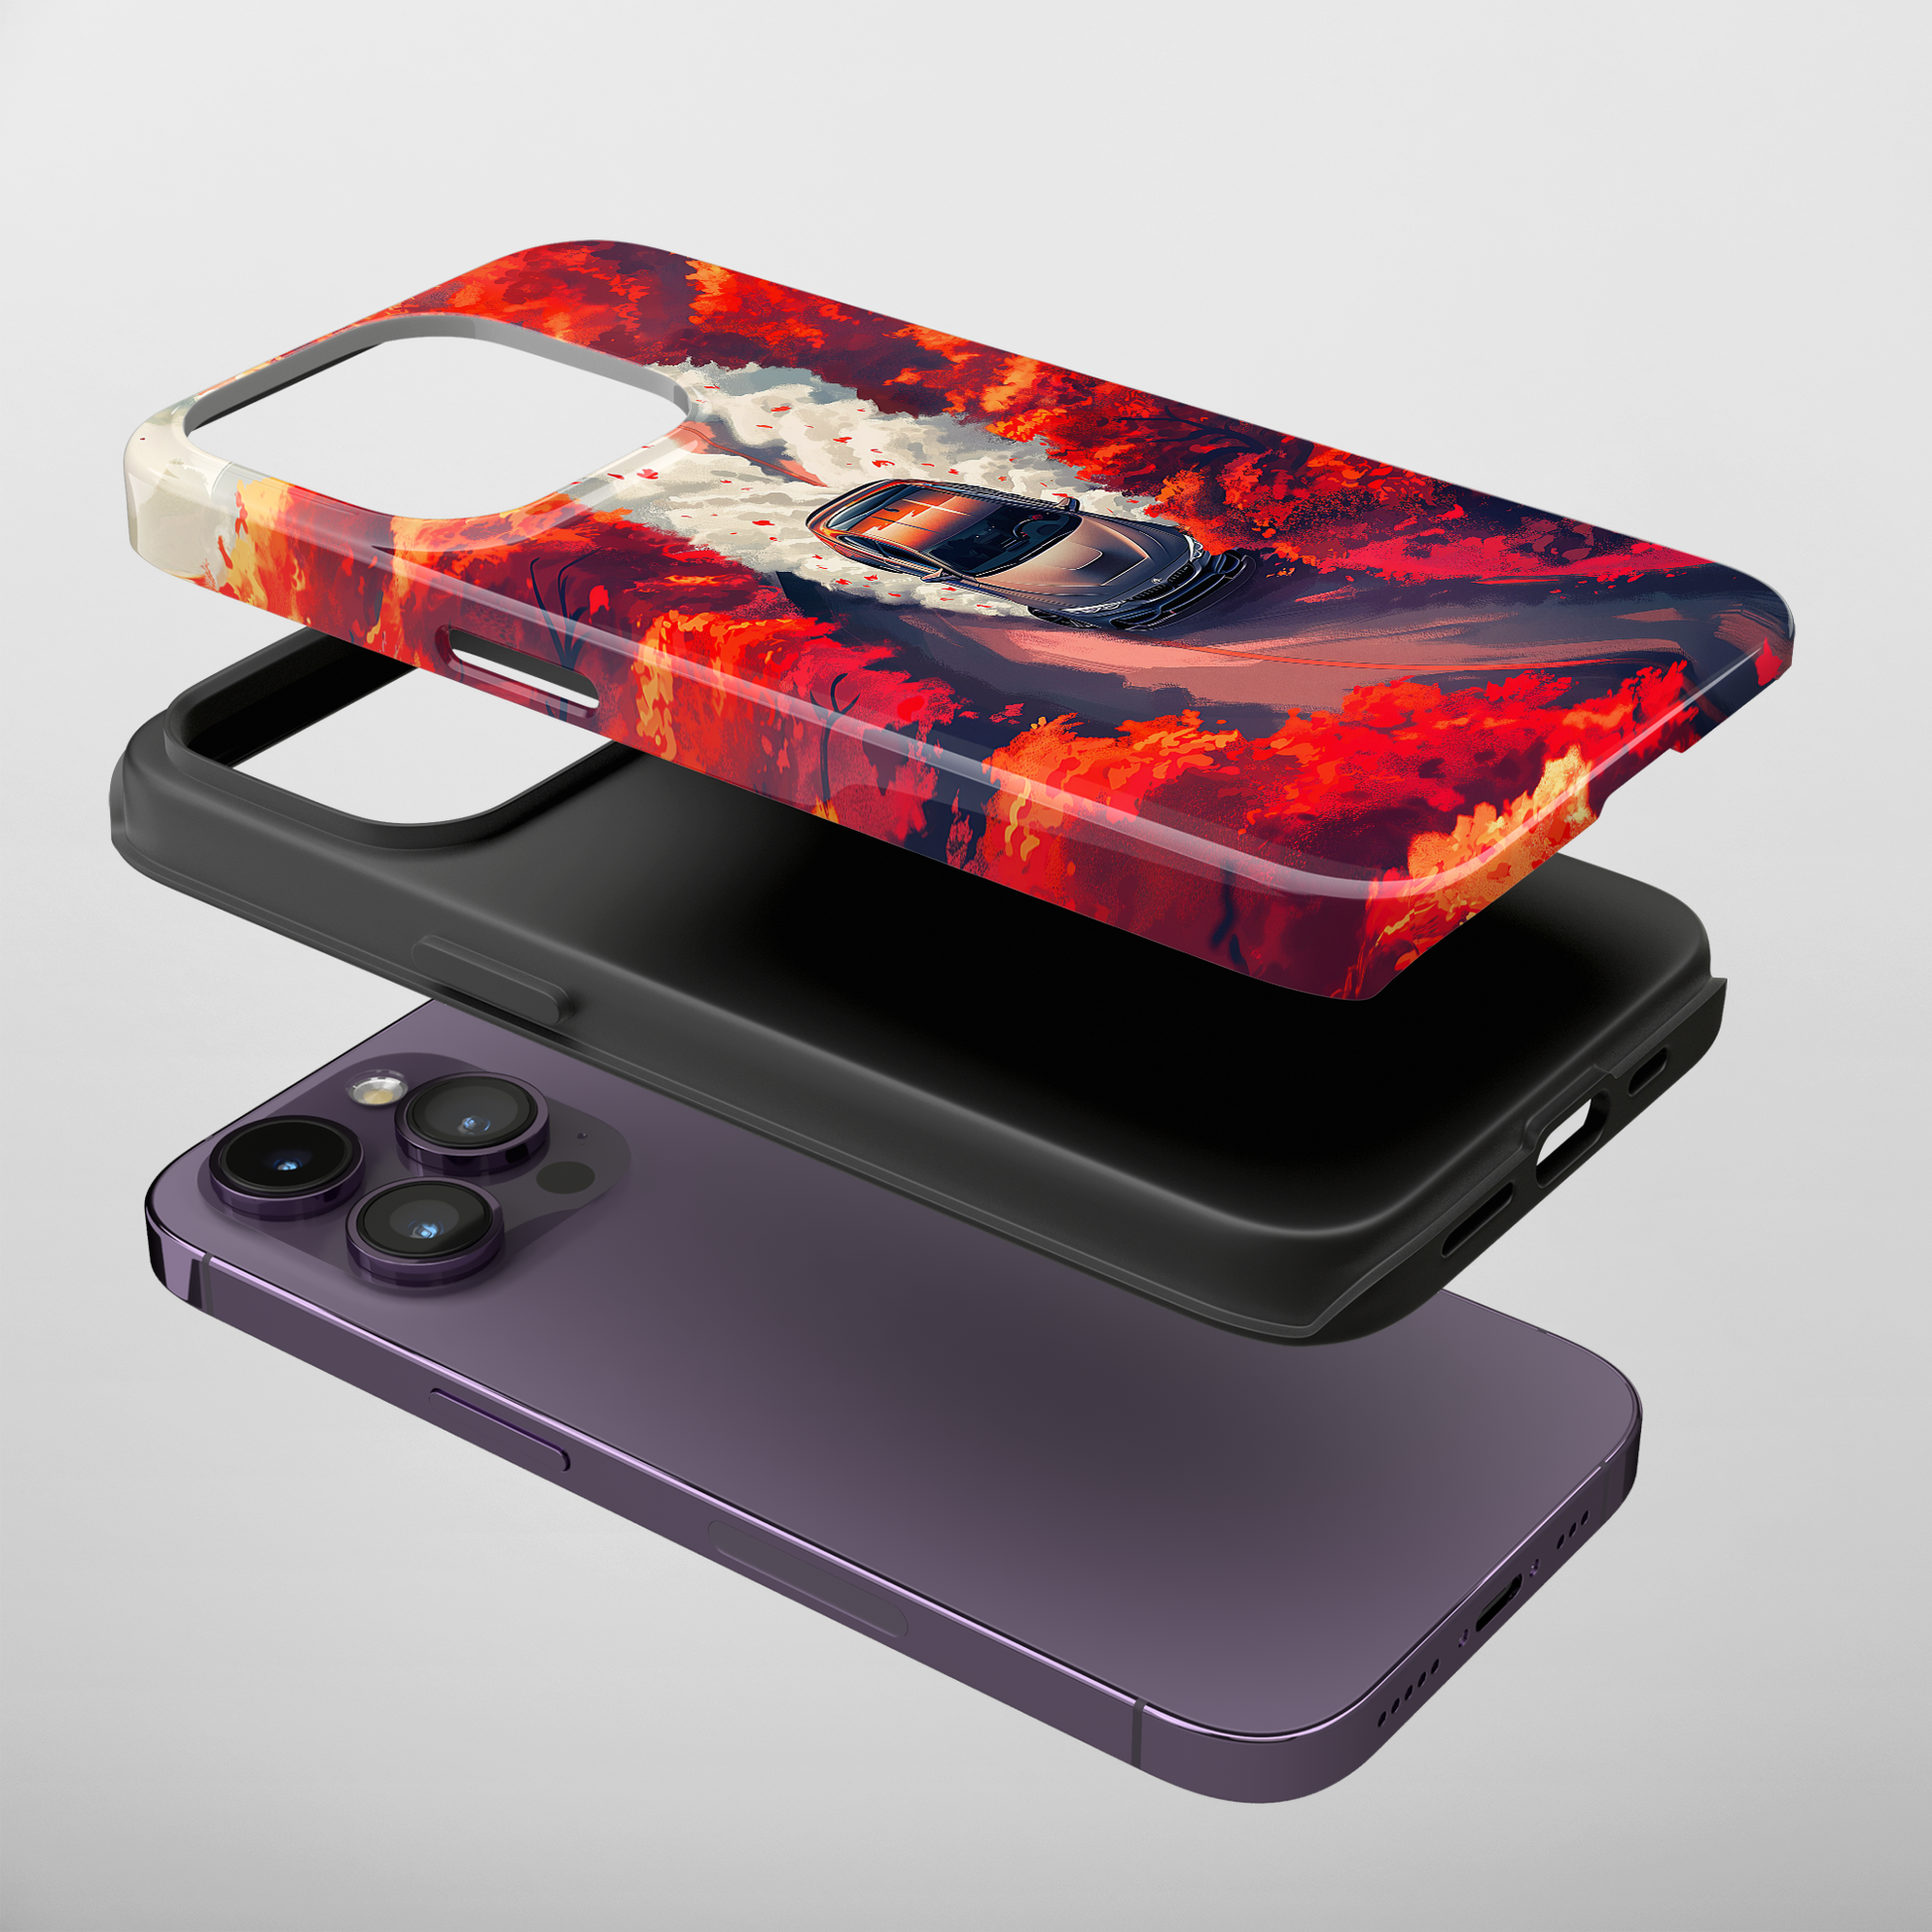 Autumn Drive (iPhone Case 11-15)Elevate your iPhone's protection and style with RimaGallery's A car journey through a fiery autumnal forest On case, featuring dual-layer defense and a sleek, glossyRimaGallery